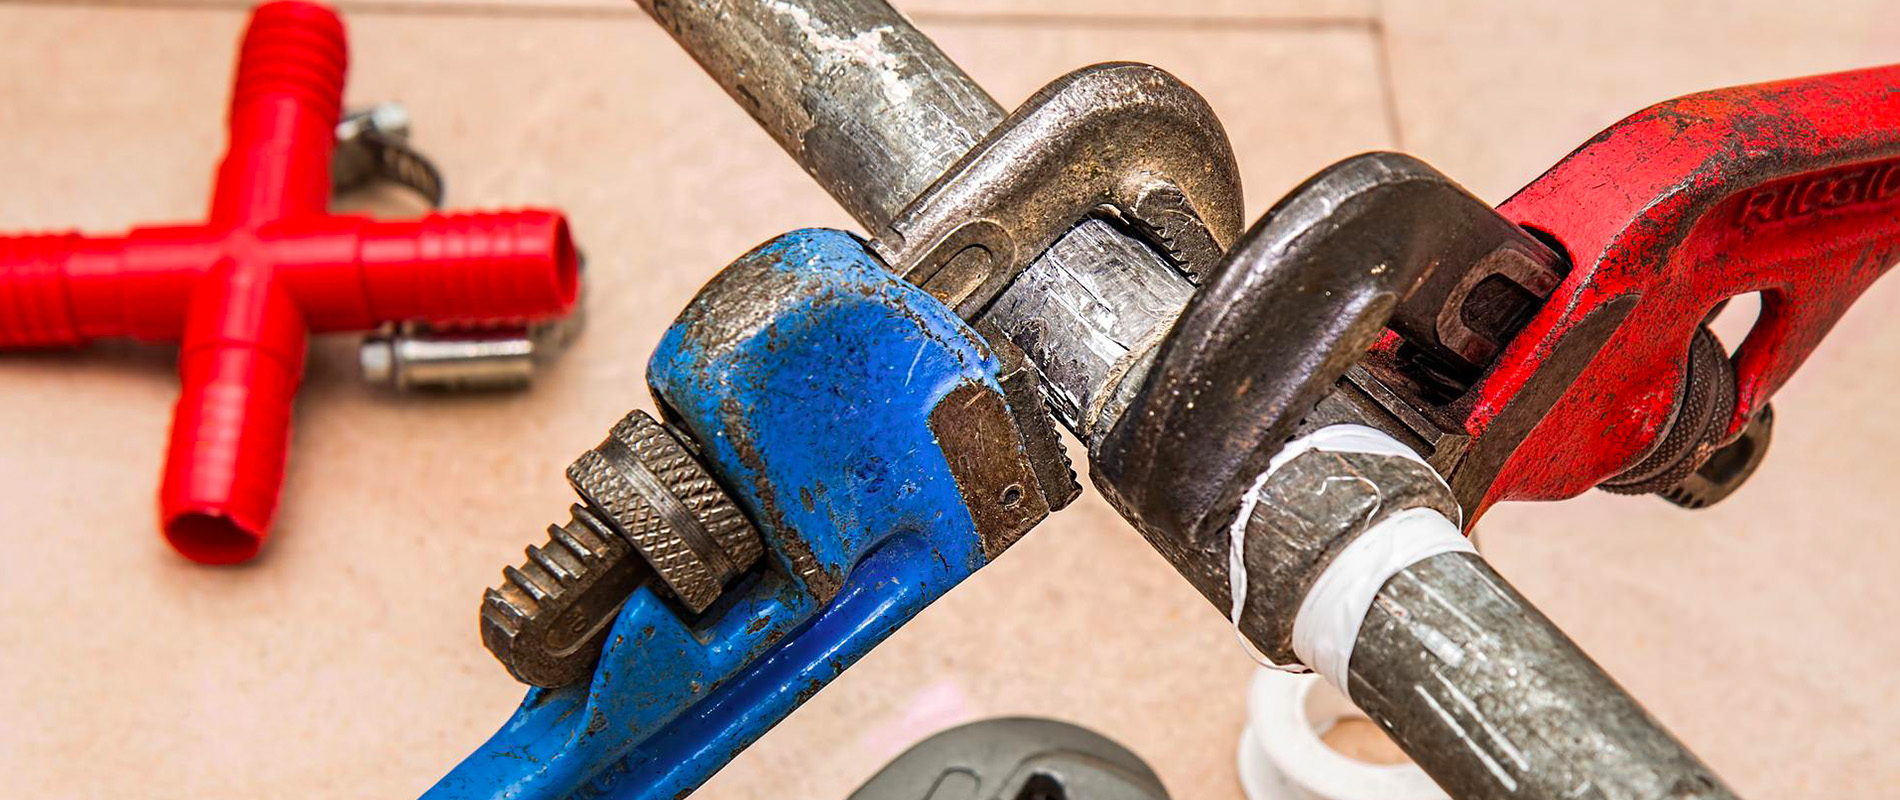 Reliable and Experienced plumbing services